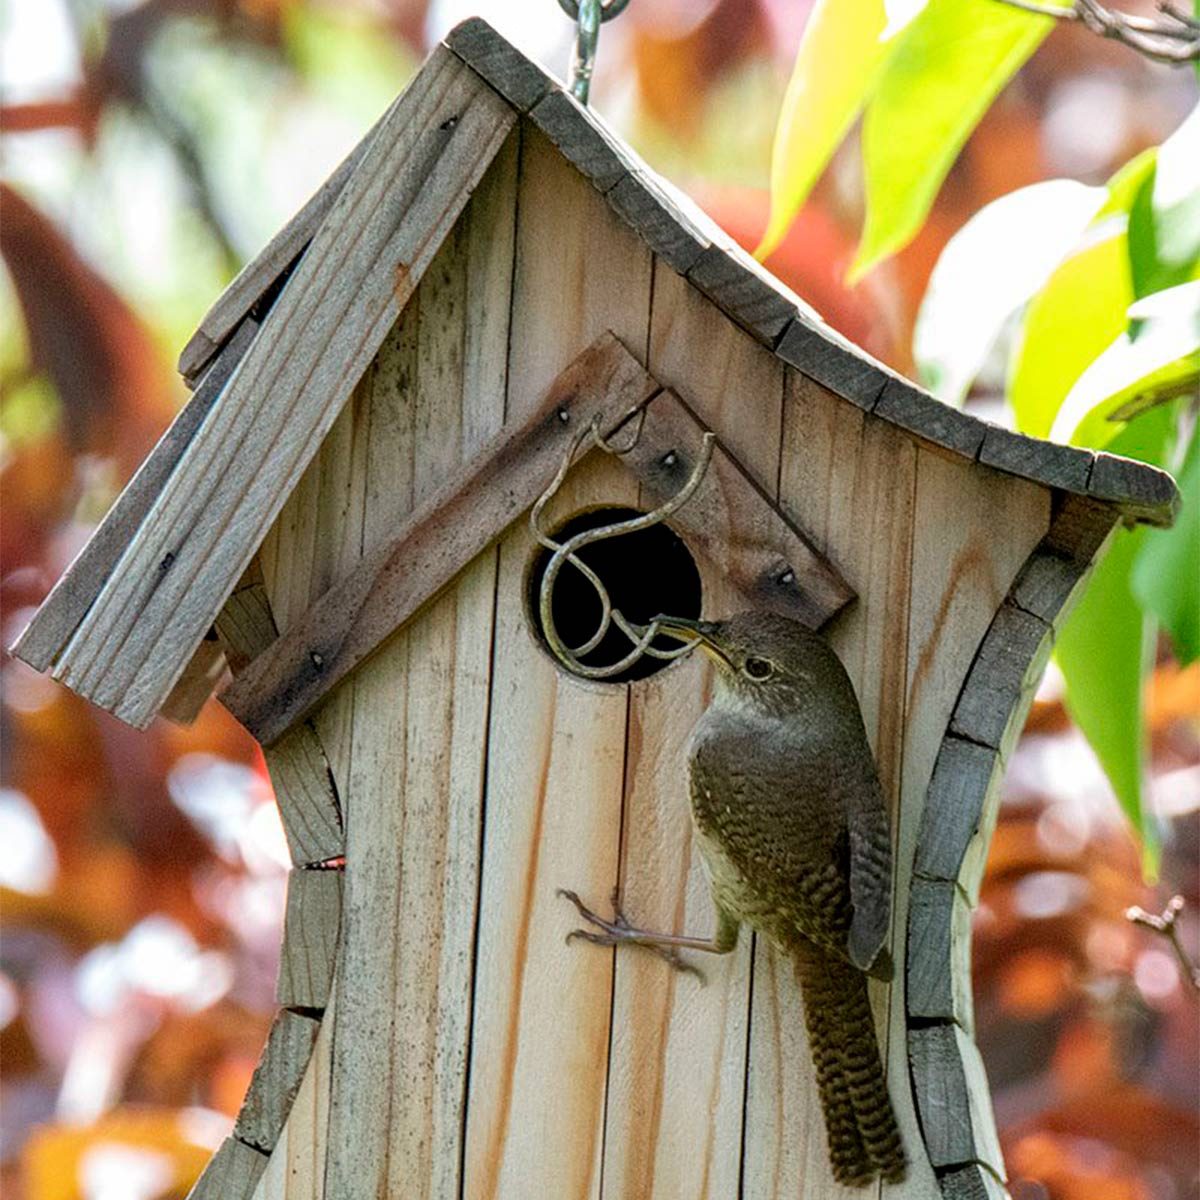 Get Rid of Wasp Nests in Birdhouses Without Pesticides